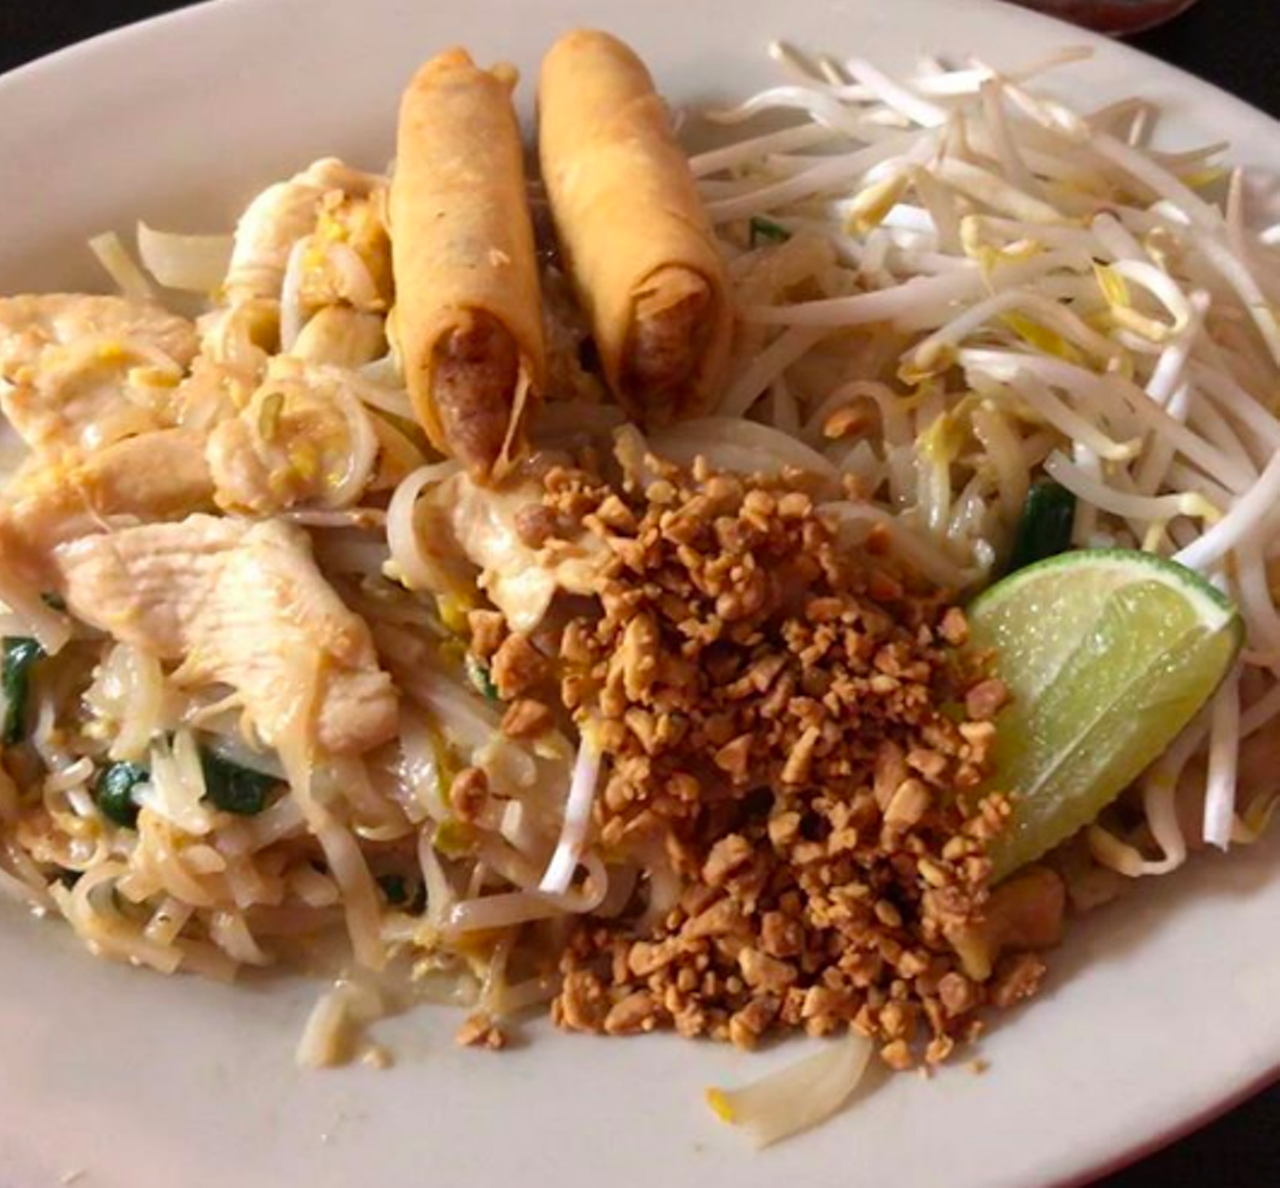 Jasmine Thai Restaurant
4065 Medical Dr, (210) 615-6622, jasminthai.org
Traditional Thai cuisine can easily be yours if you pay a visit to Jasmine Thai. This casual spot, founded by Chef Boonthin Srisoongnern, features dishes such as a variety of curries and noodles.
Photo via Instagram / someone_feed_sarah